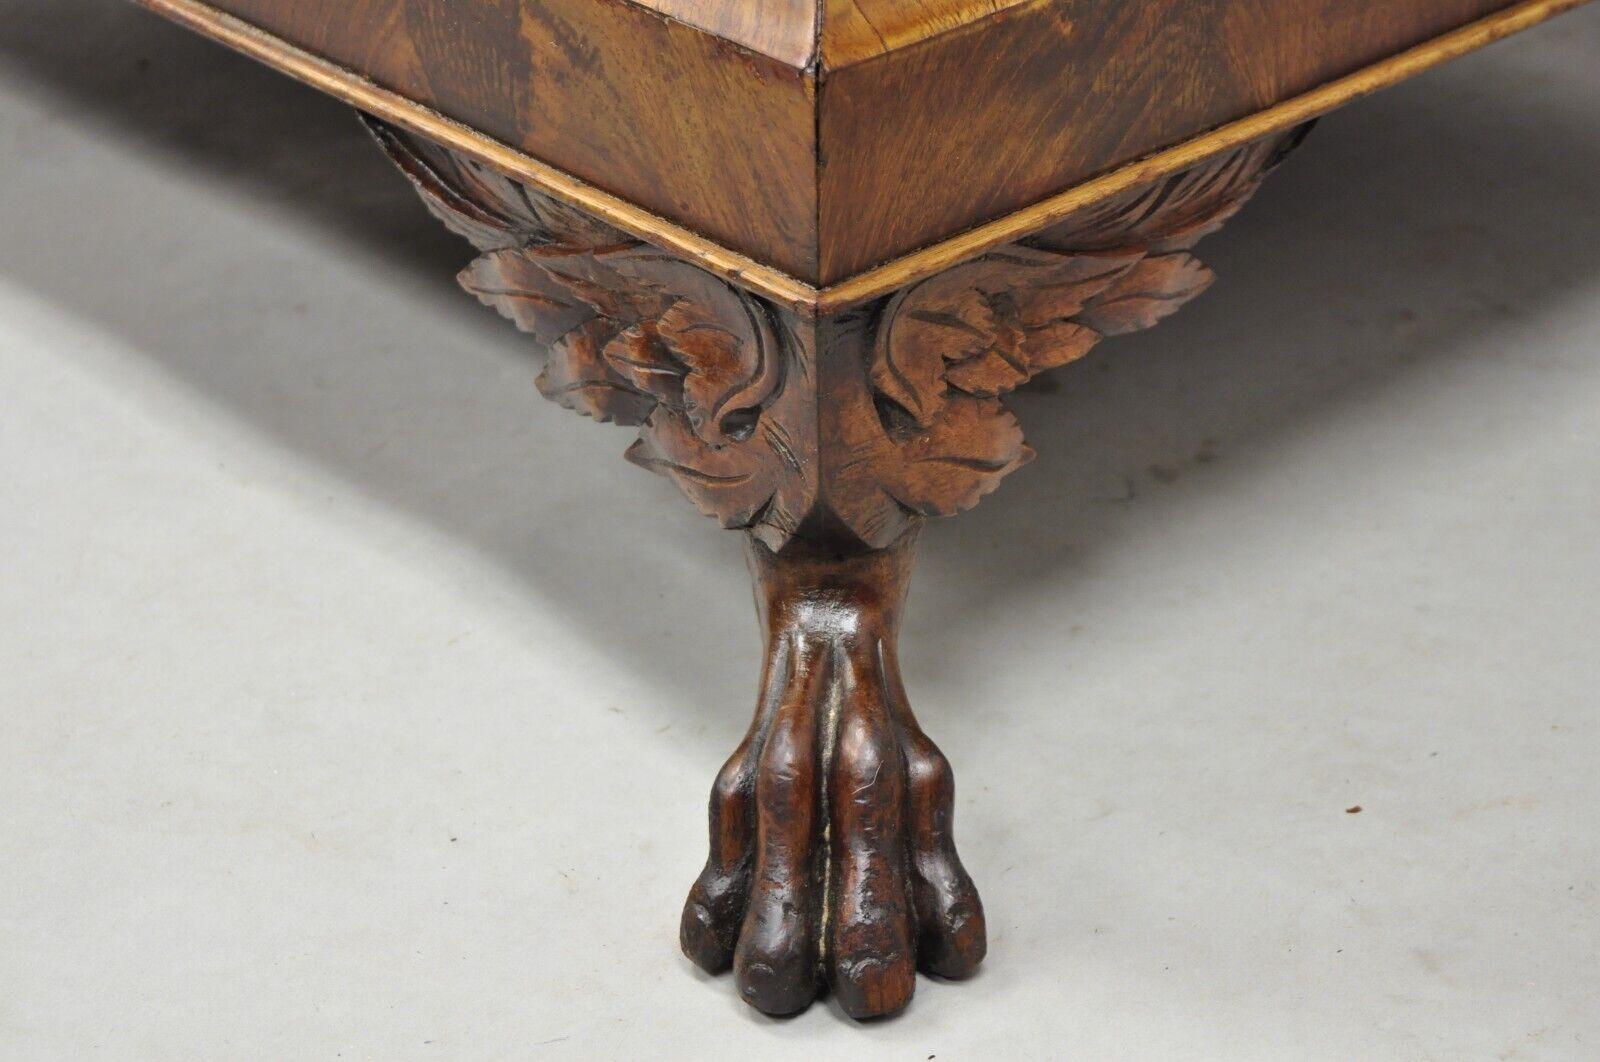 19th C. American Empire Carved Winged Paw Foot Mahogany Large Box Stool Ottoman In Good Condition For Sale In Philadelphia, PA